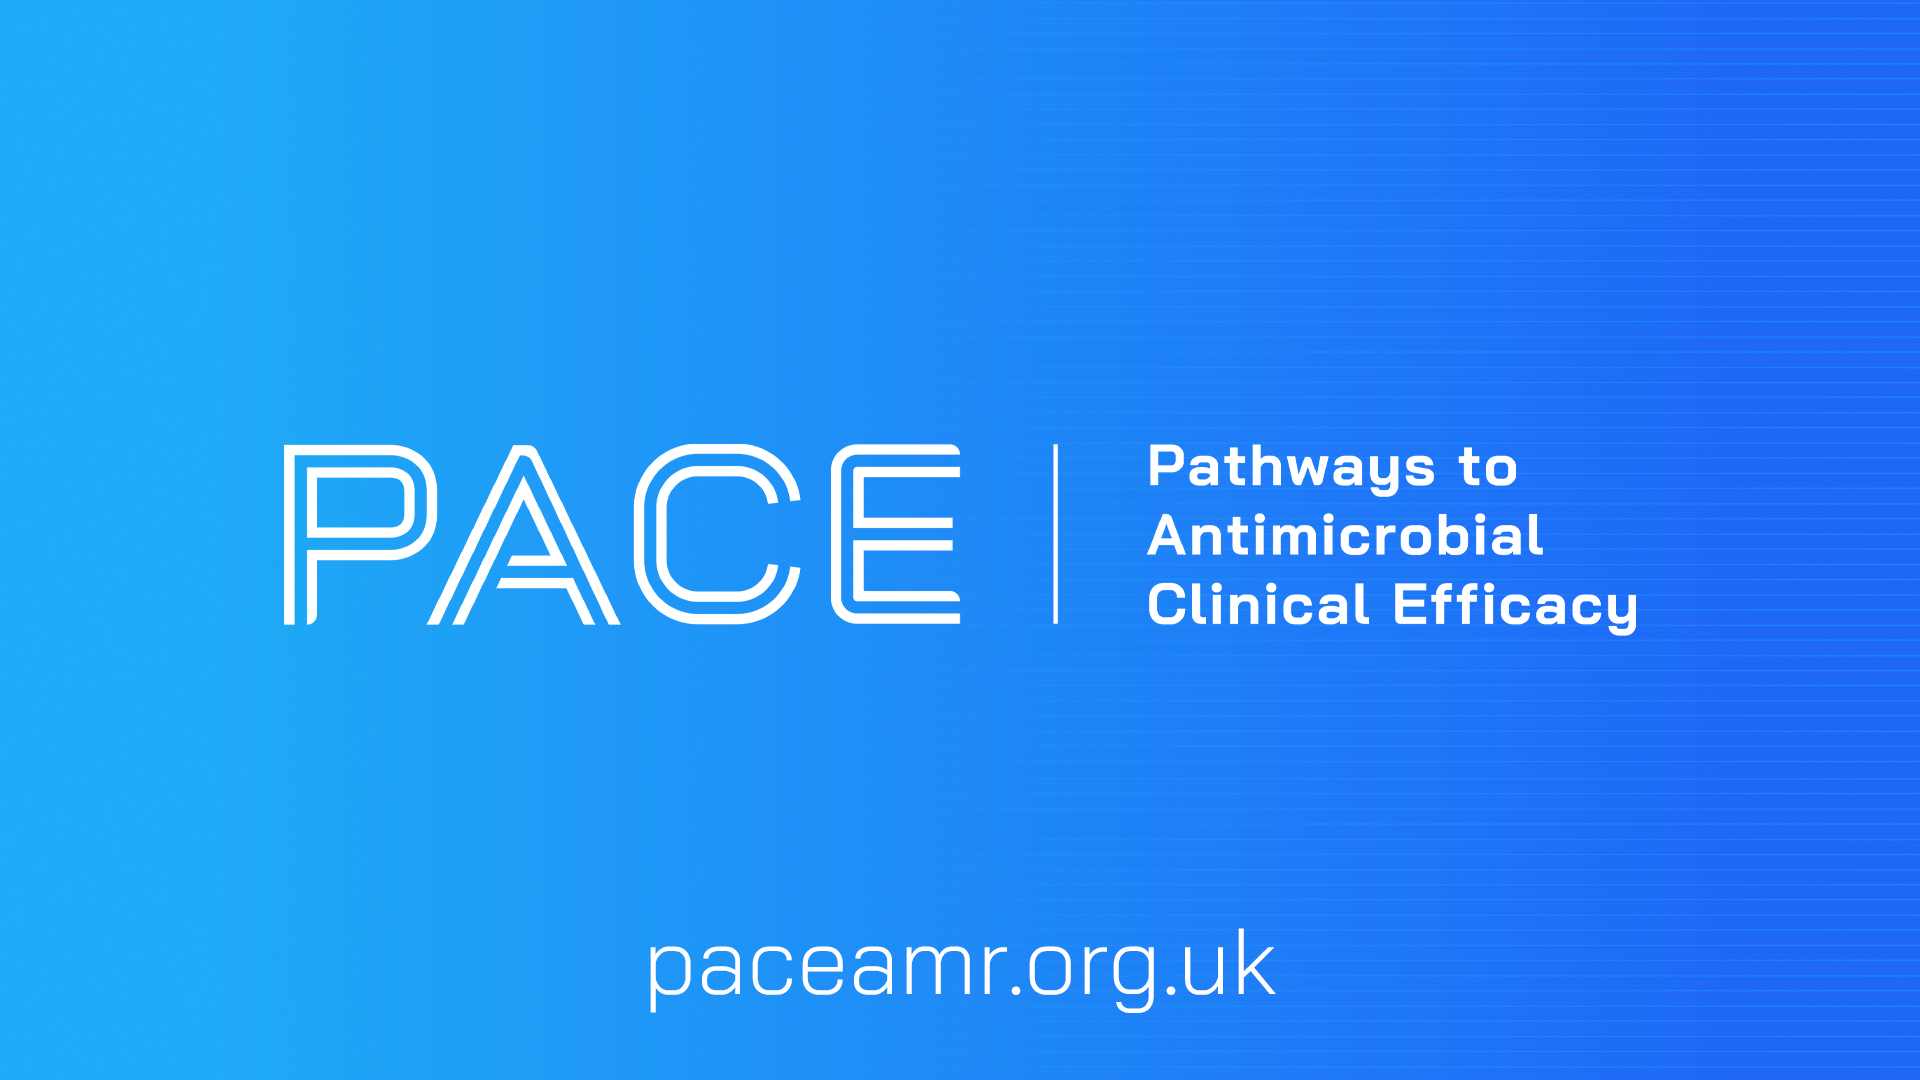 Pioneering partnership supports early-stage innovation against antimicrobial resistance to save lives